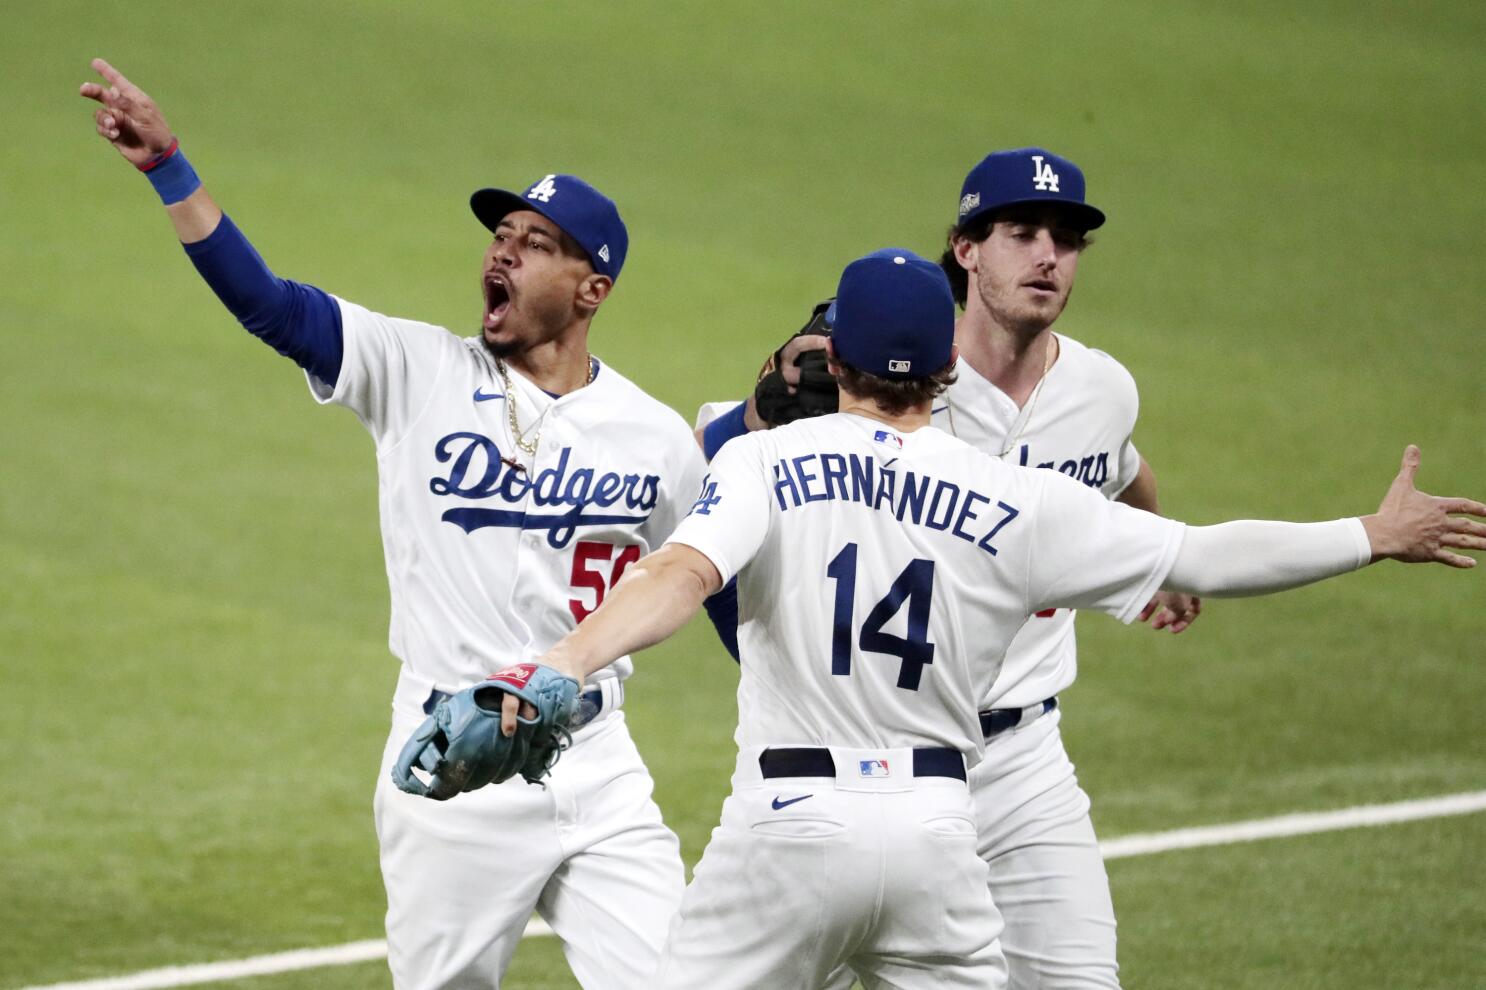 Double play helps rescue Padres in NLDS Game 2 win vs. Dodgers